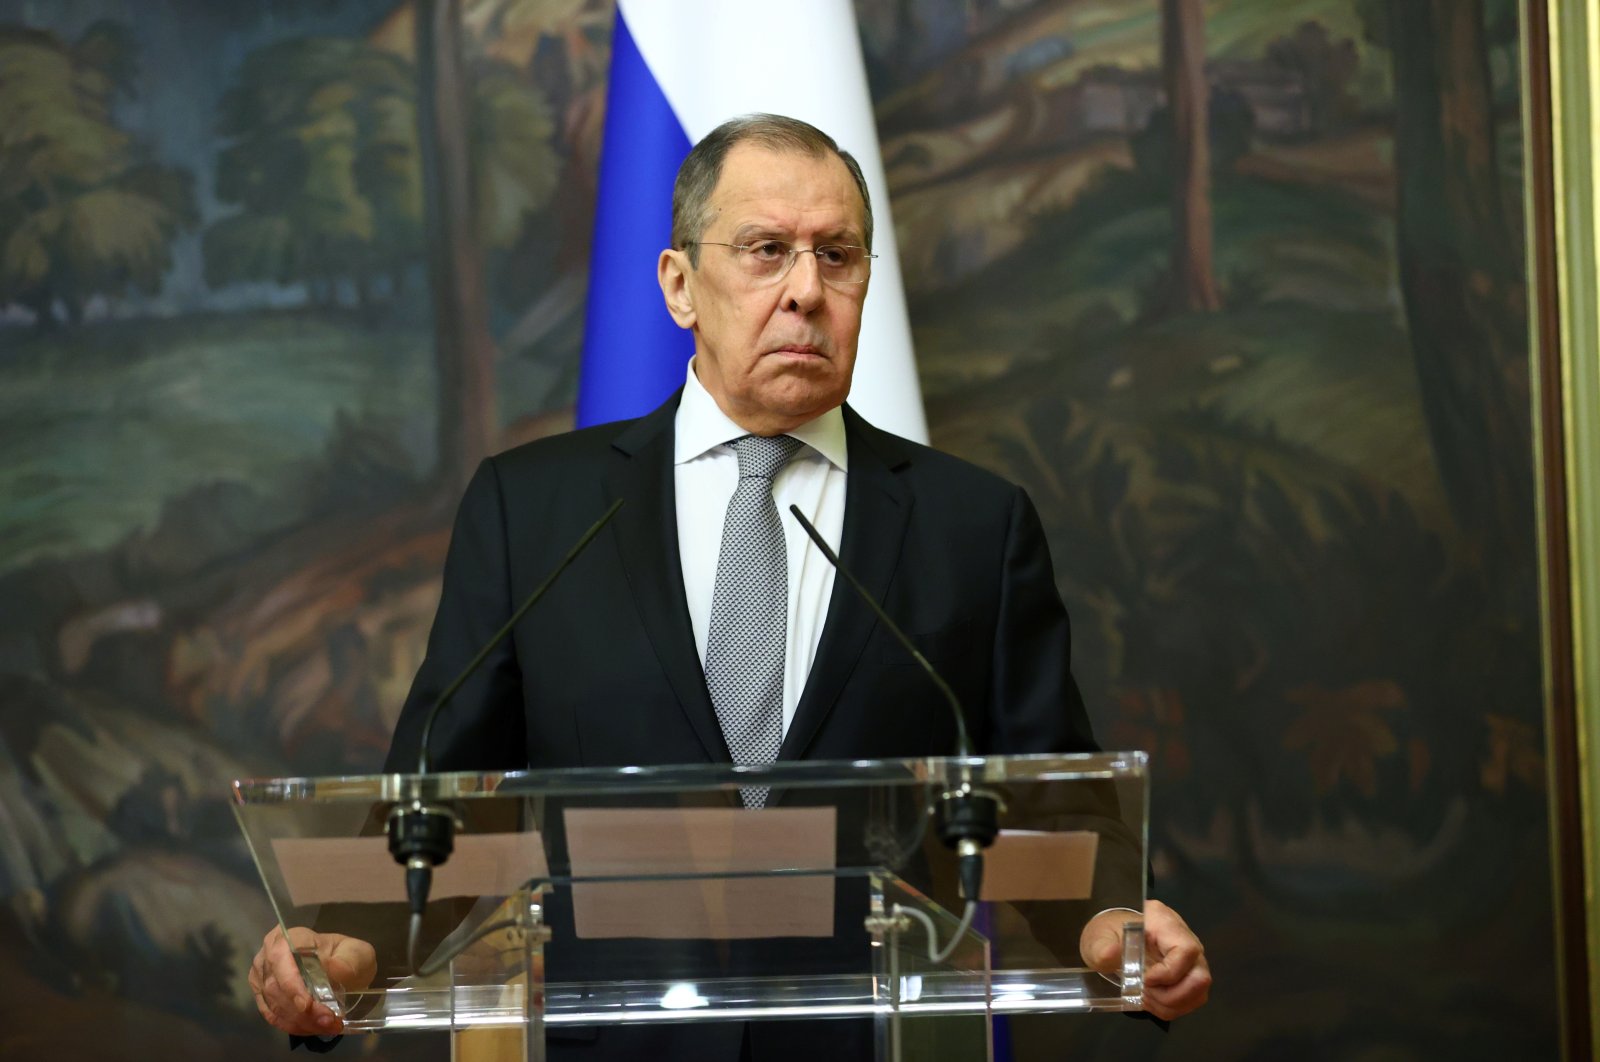 Russian Foreign Minister Sergey Lavrov attends a news conference with his Armenian counterpart Zohrab Mnatsakanyan in Moscow, Russia, Oct. 12, 2020. (Reuters Photo)